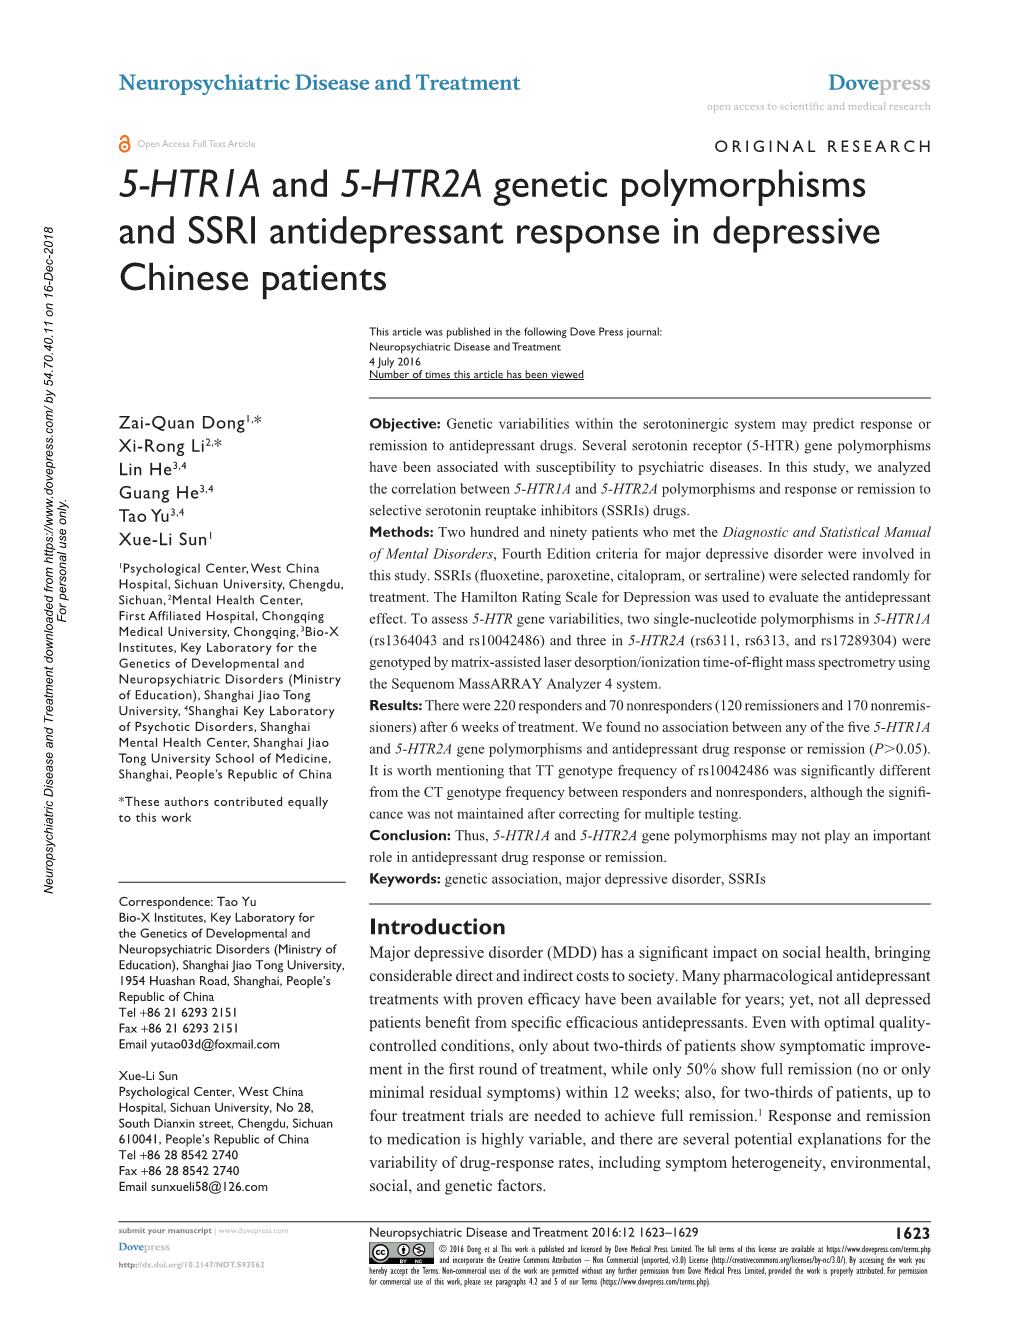 5-HTR1A and 5-HTR2A Genetic Polymorphisms and SSRI Antidepressant Response in Depressive Chinese Patients